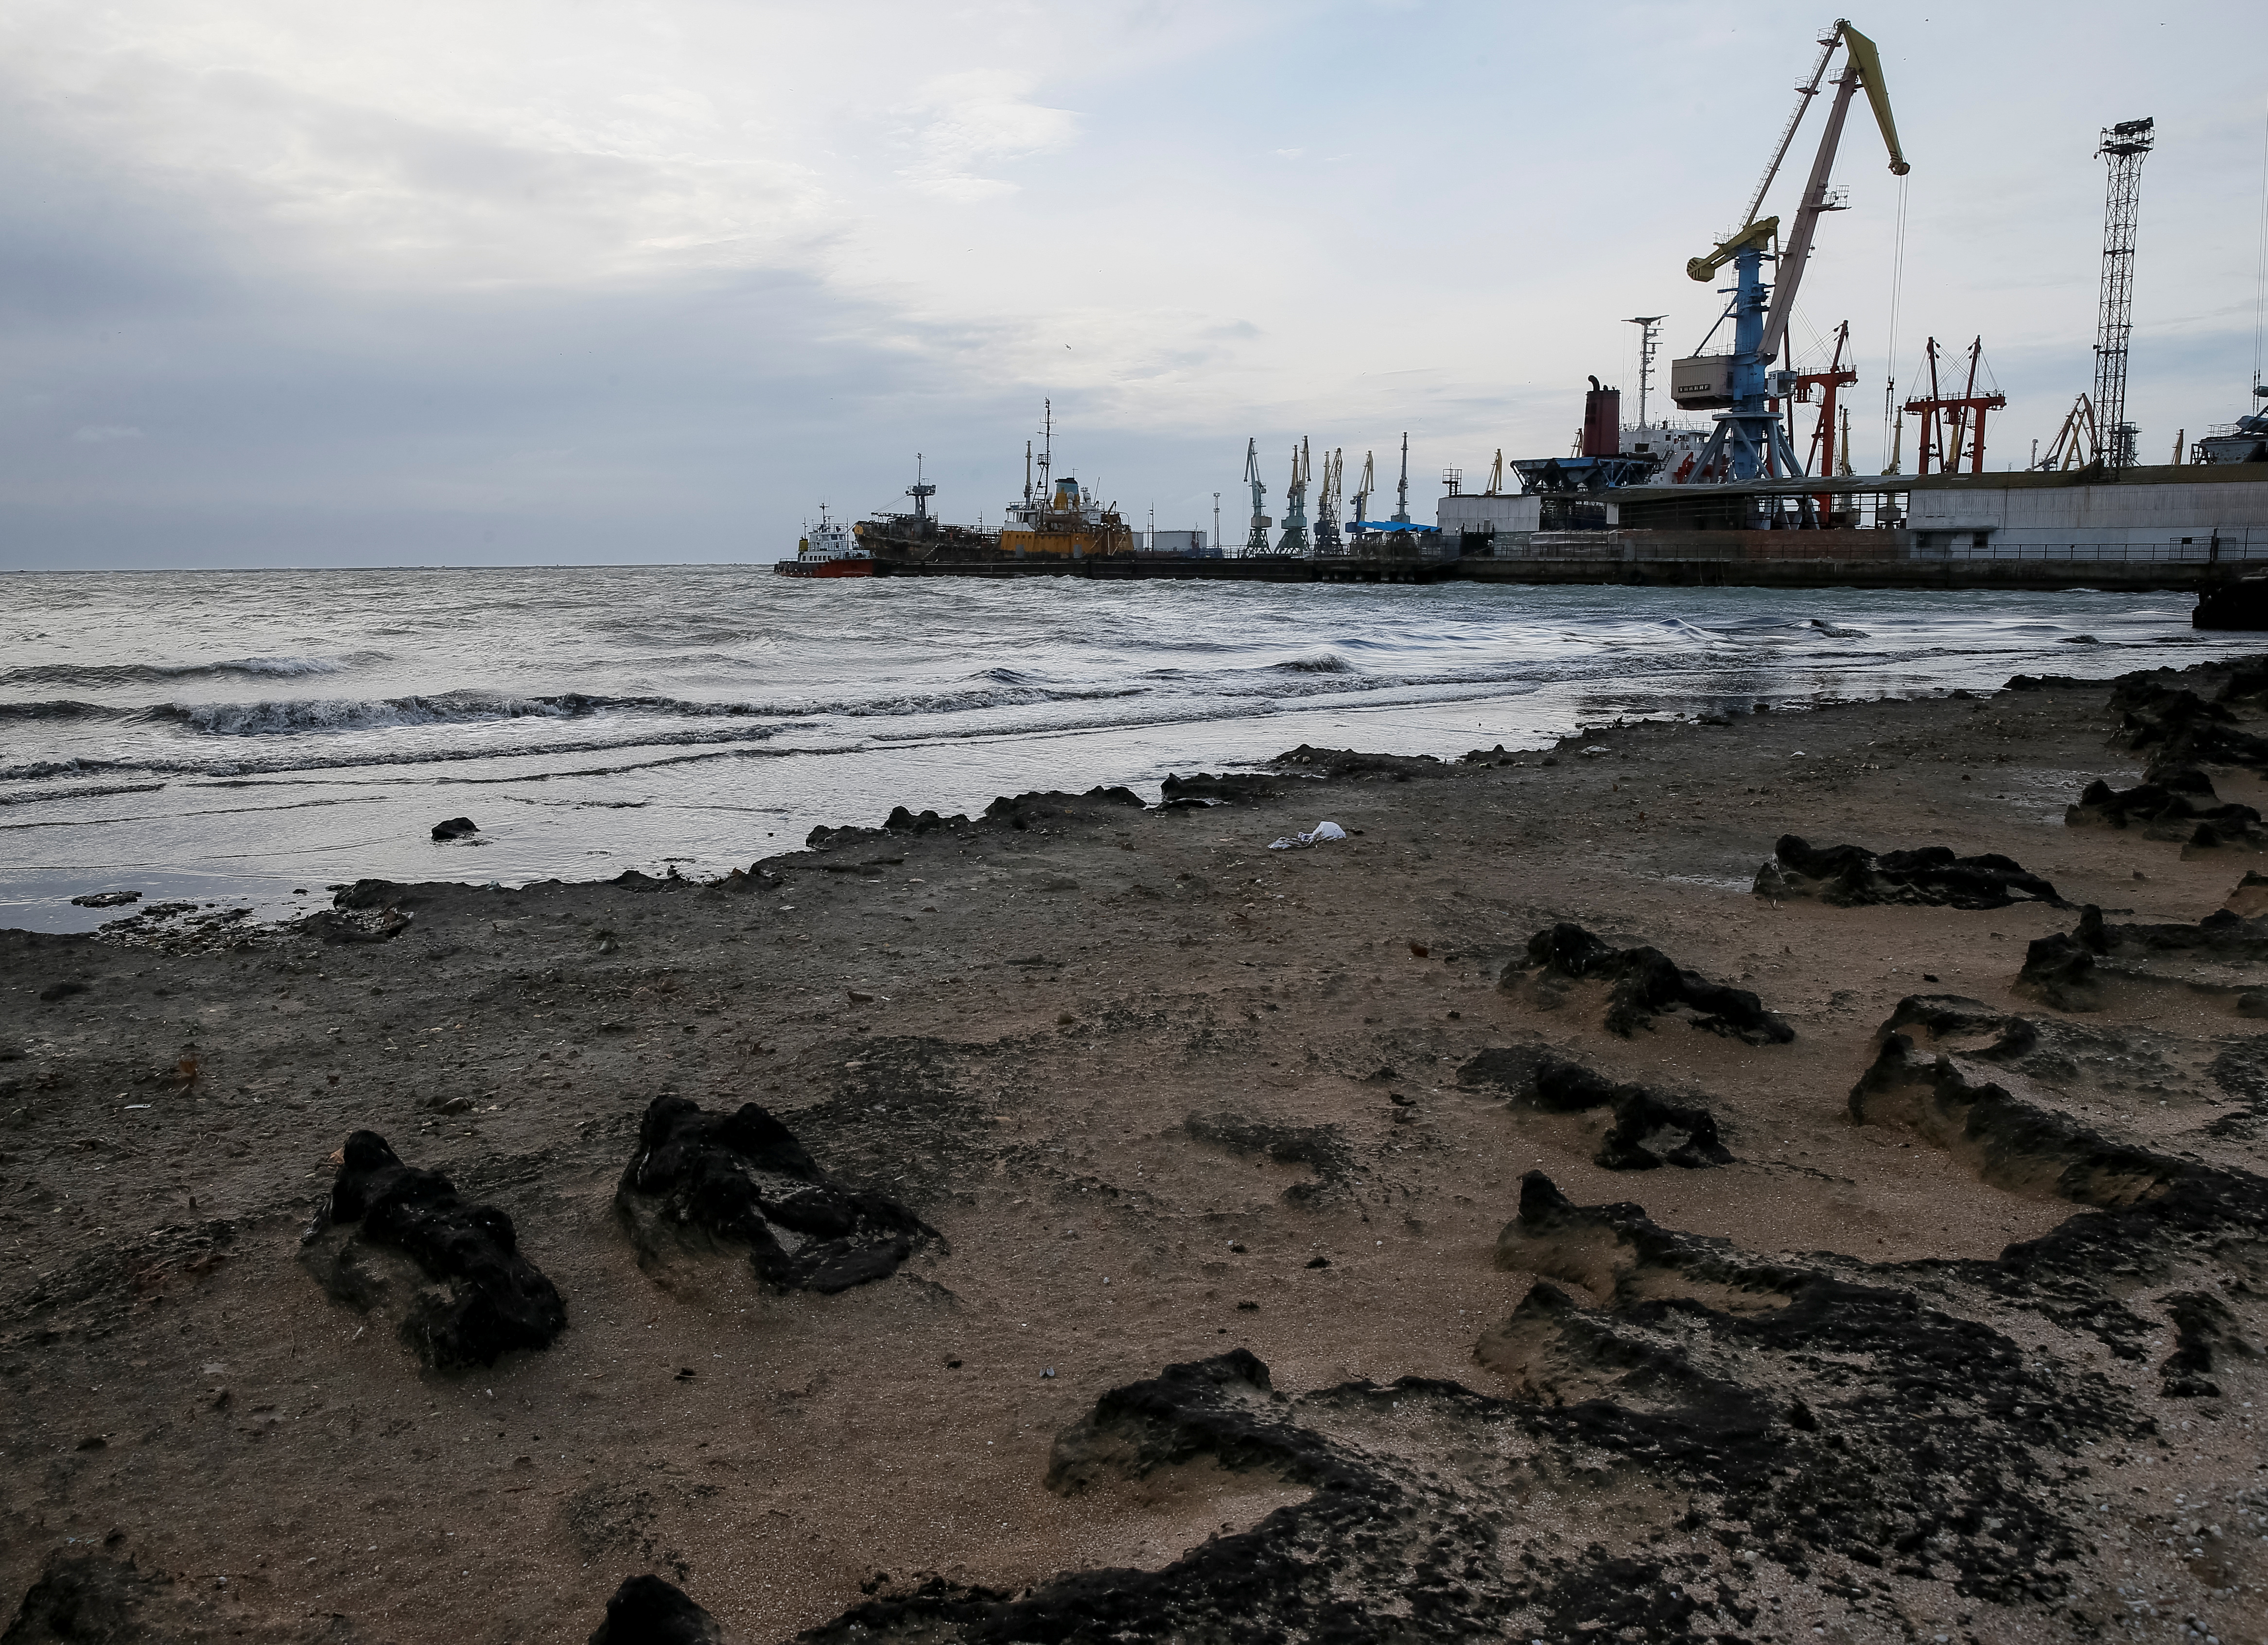 Cranes and ships are seen in the Azov Sea port of Berdyansk